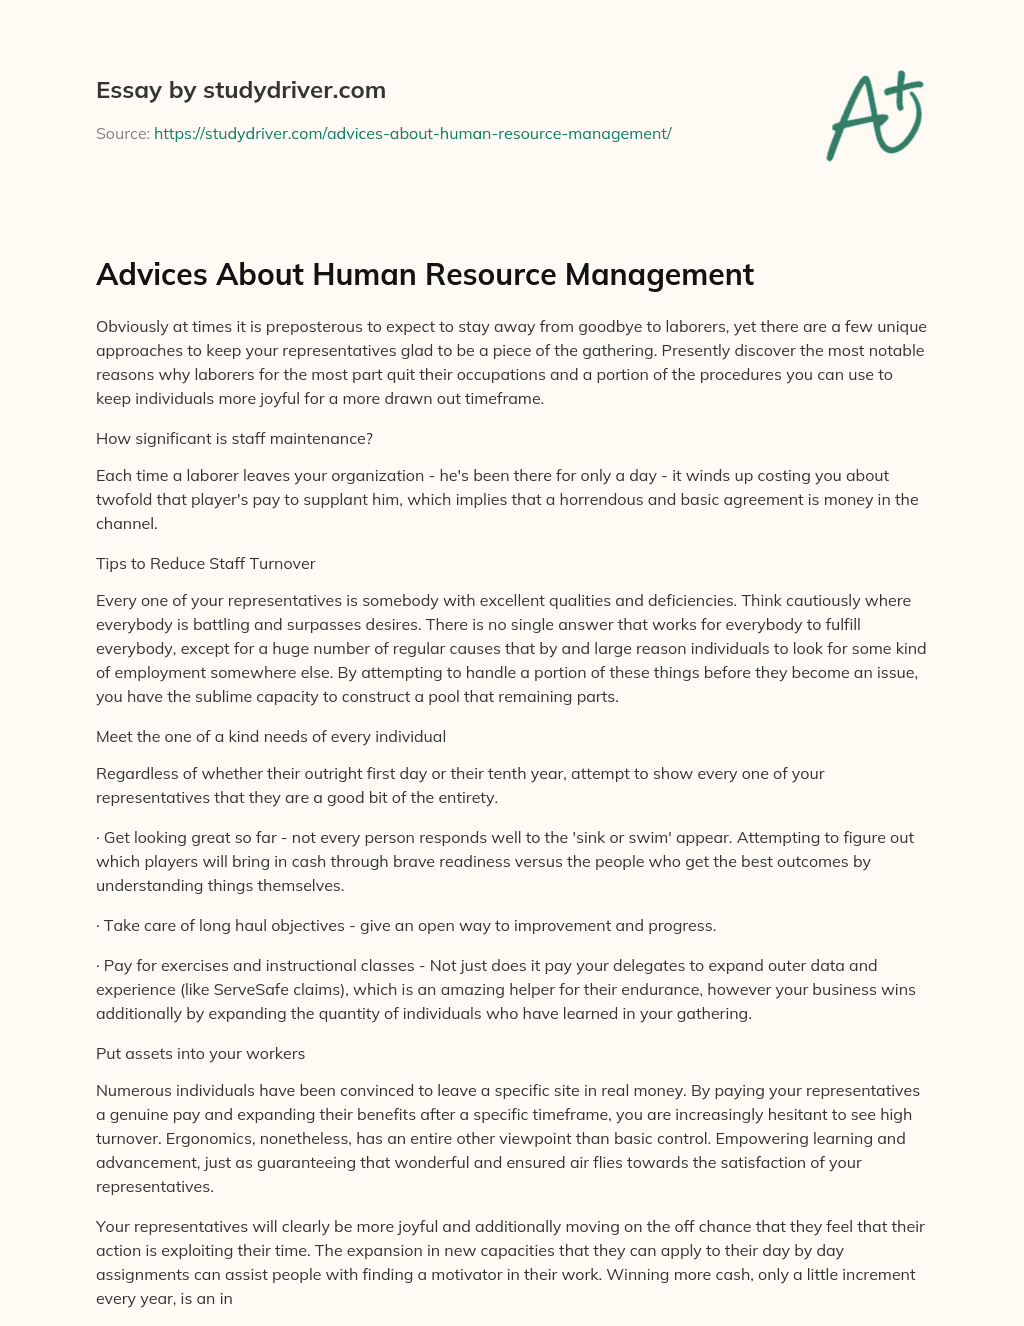 Advices about Human Resource Management essay